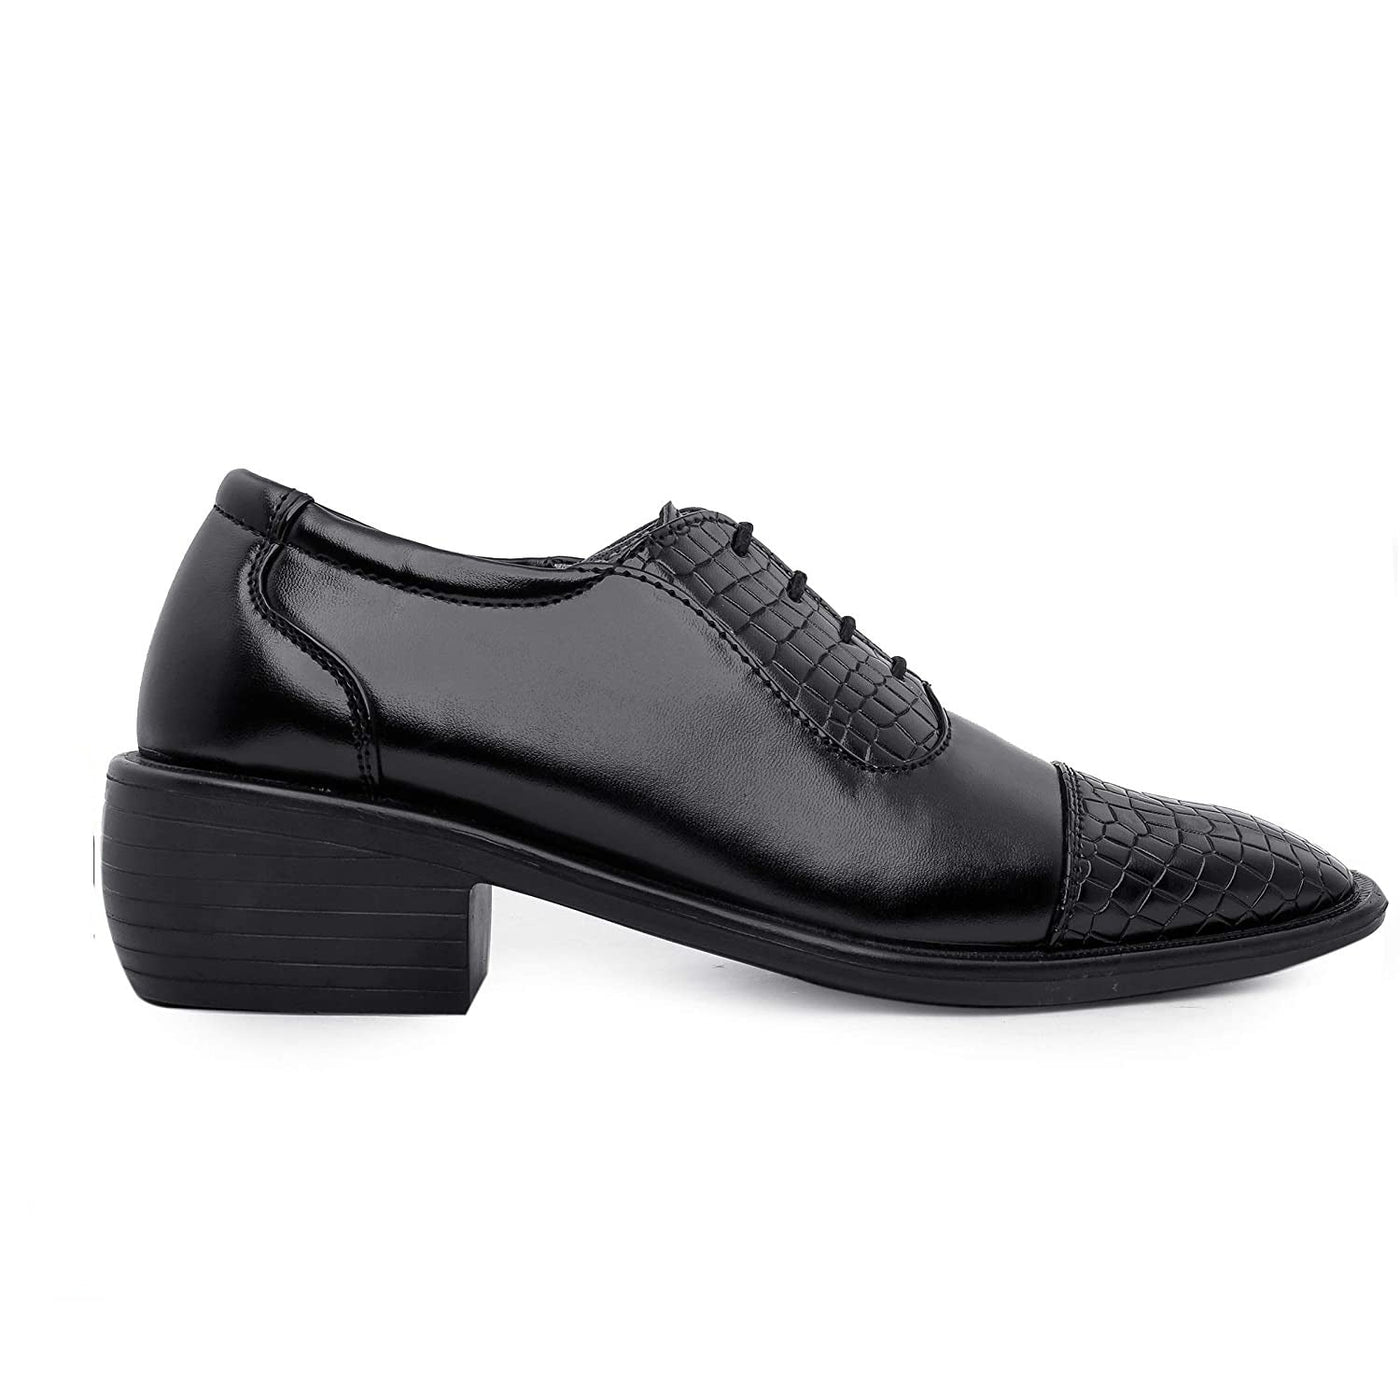 Stylish Black Formal and Casual Wear Lace-Up Shoes With Height Increasing Heel-Unique and Classy